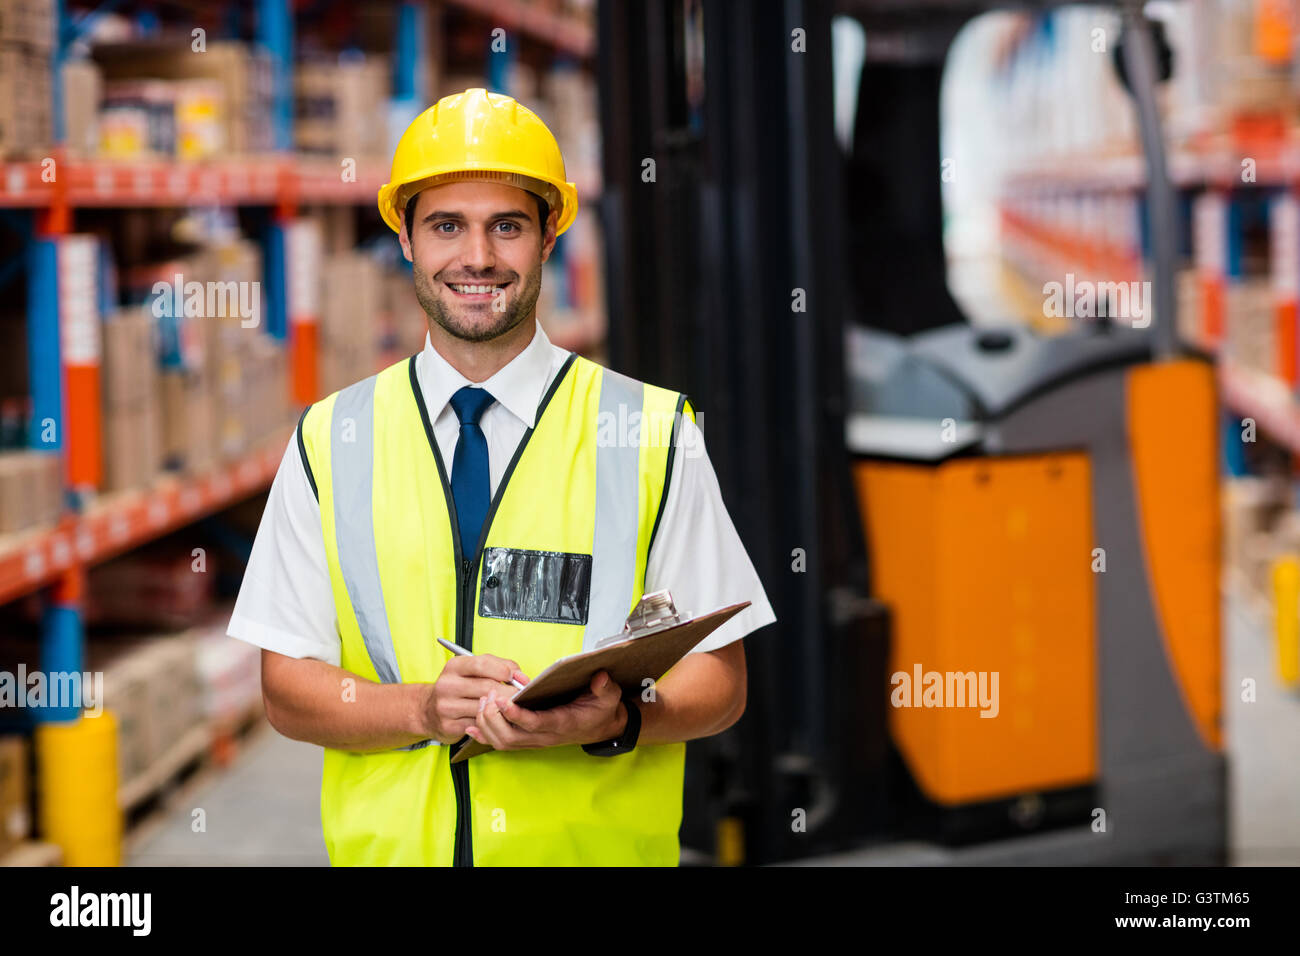 Smiling warehouse manager with clipboard Stock Photo